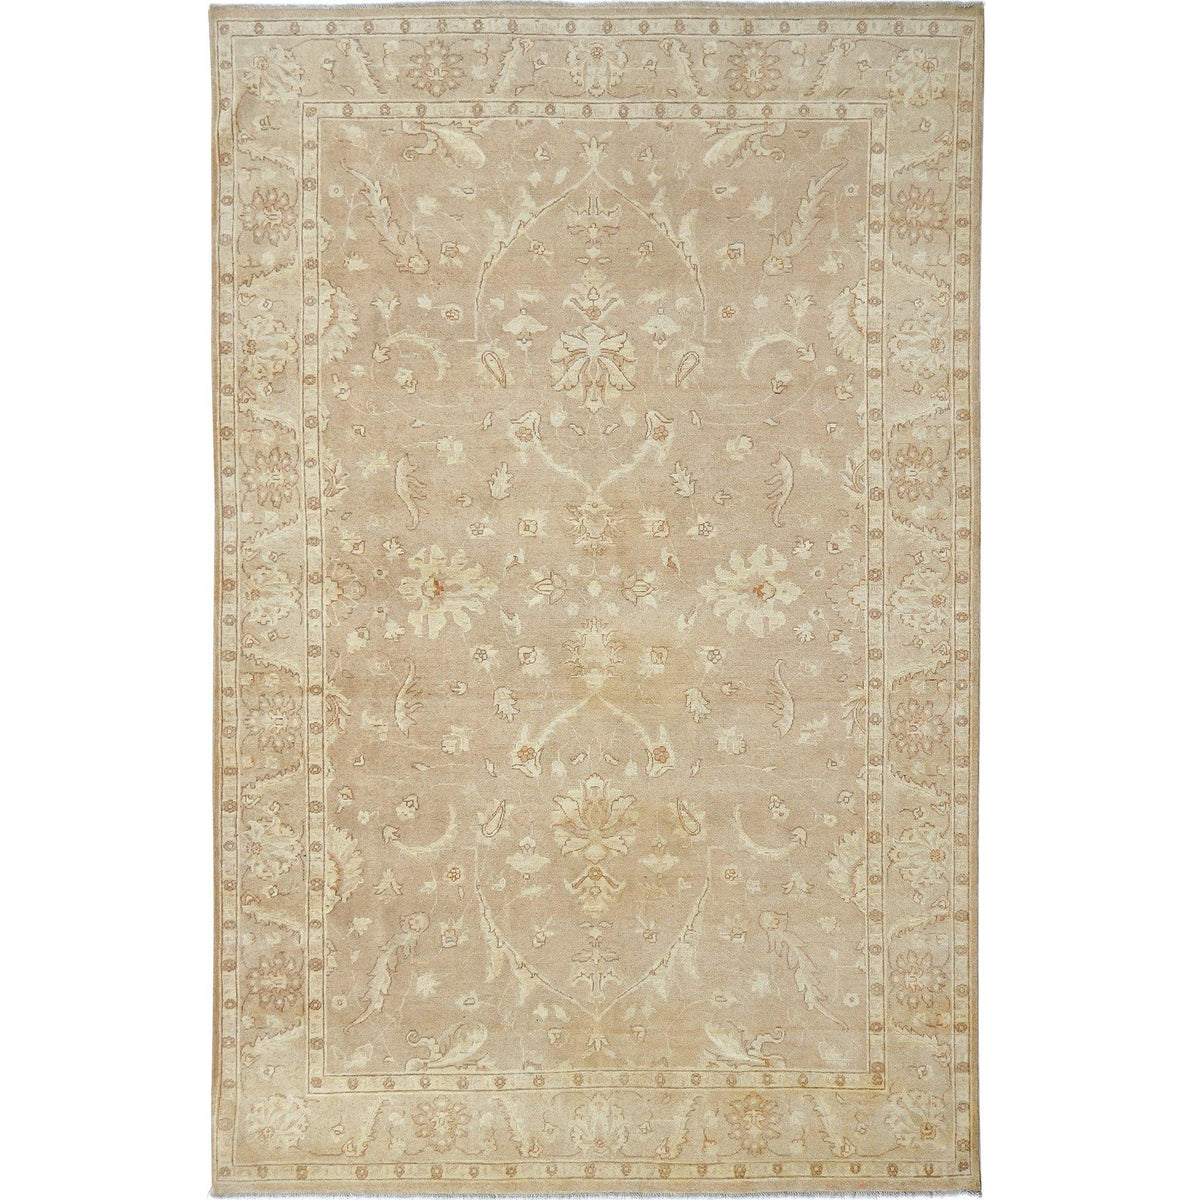 Fine Hand-knotted Colour Reform Wool Rug 194cm x 285cm